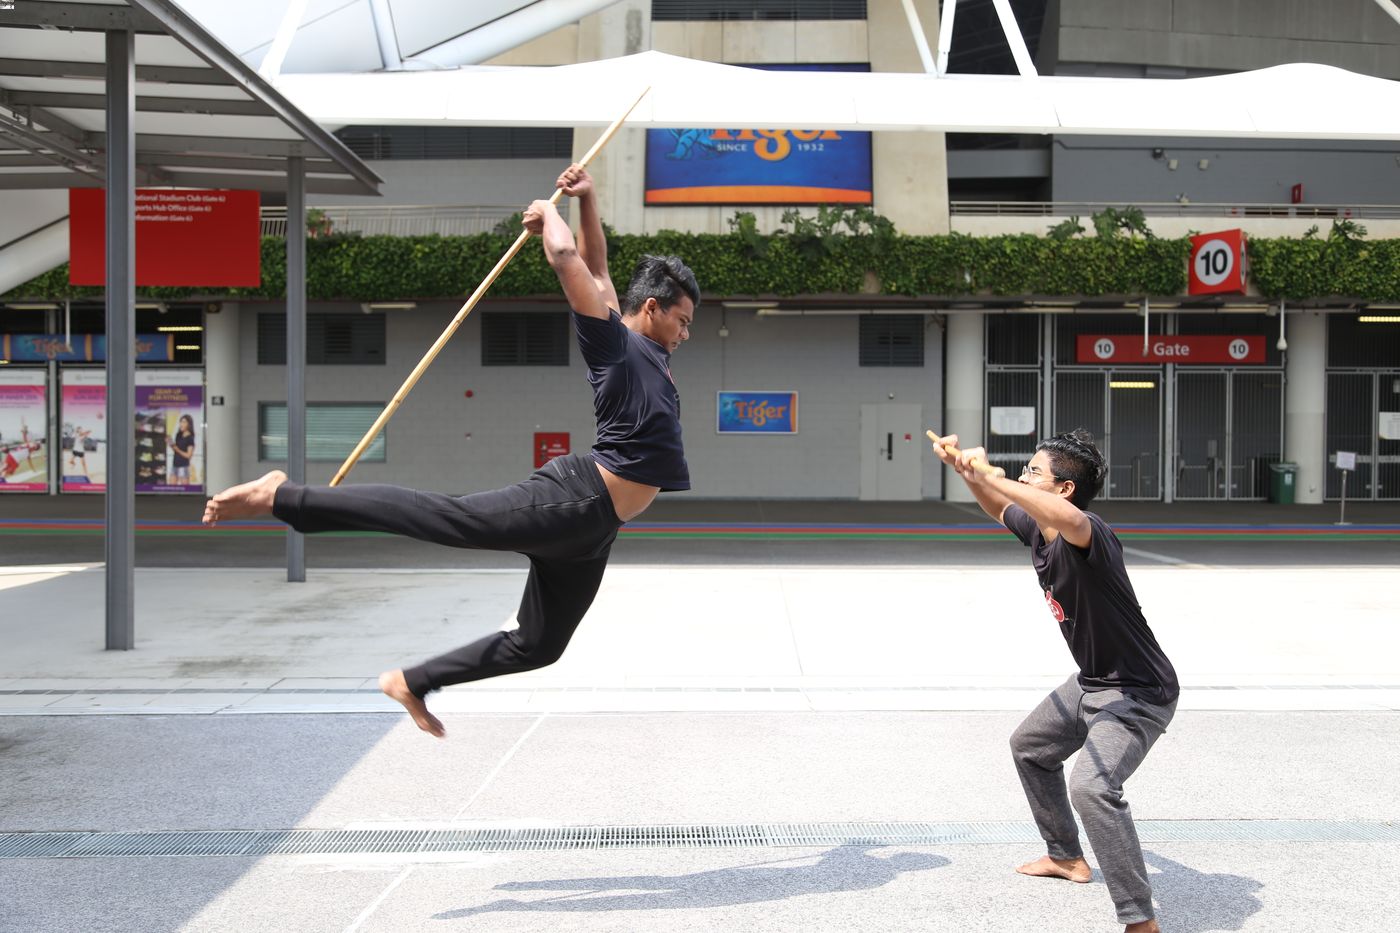 A double hand overhead strike in peacock posture